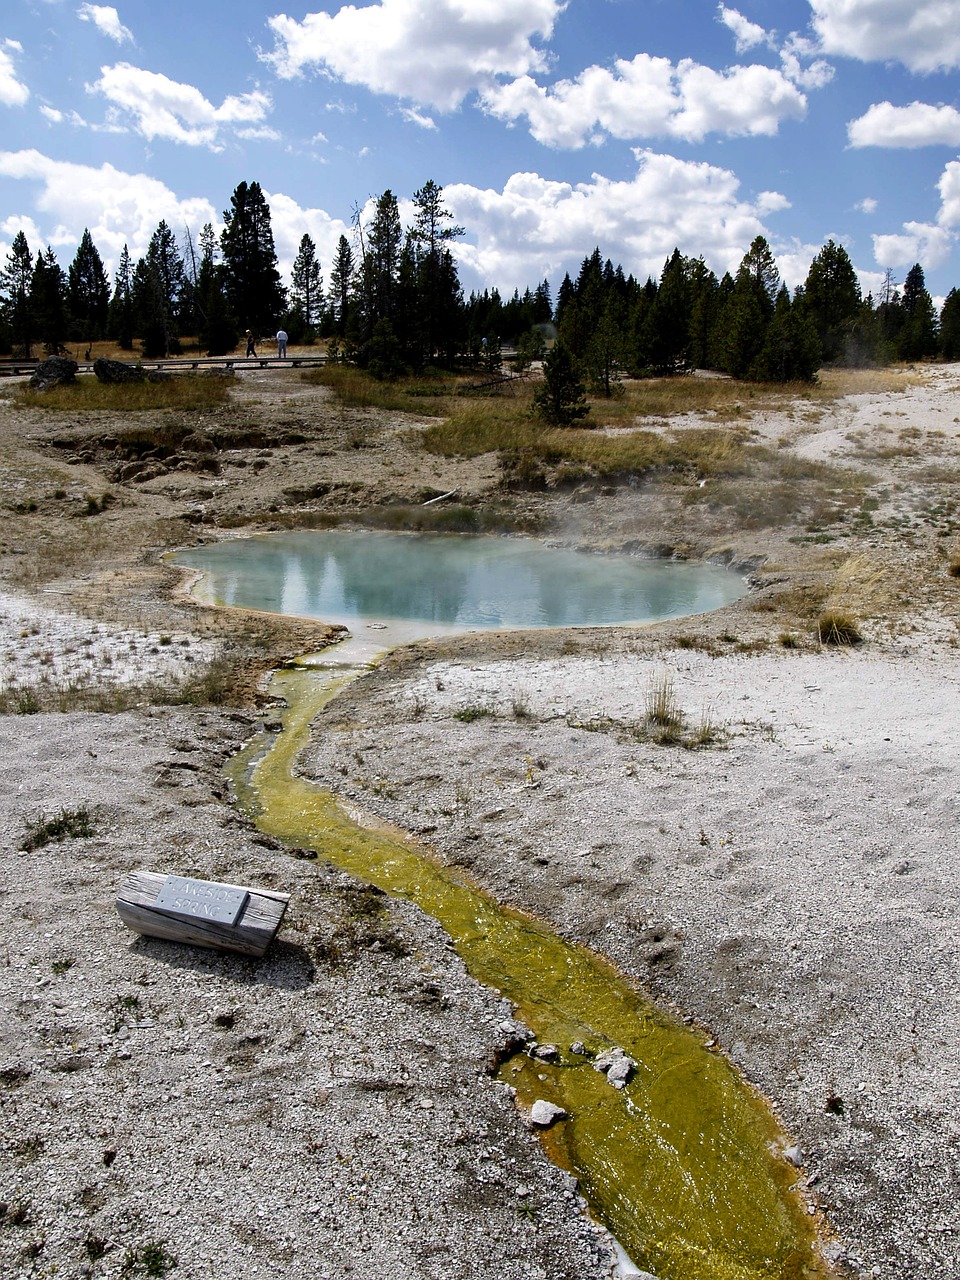 geothermal pond yellowstone national park free photo